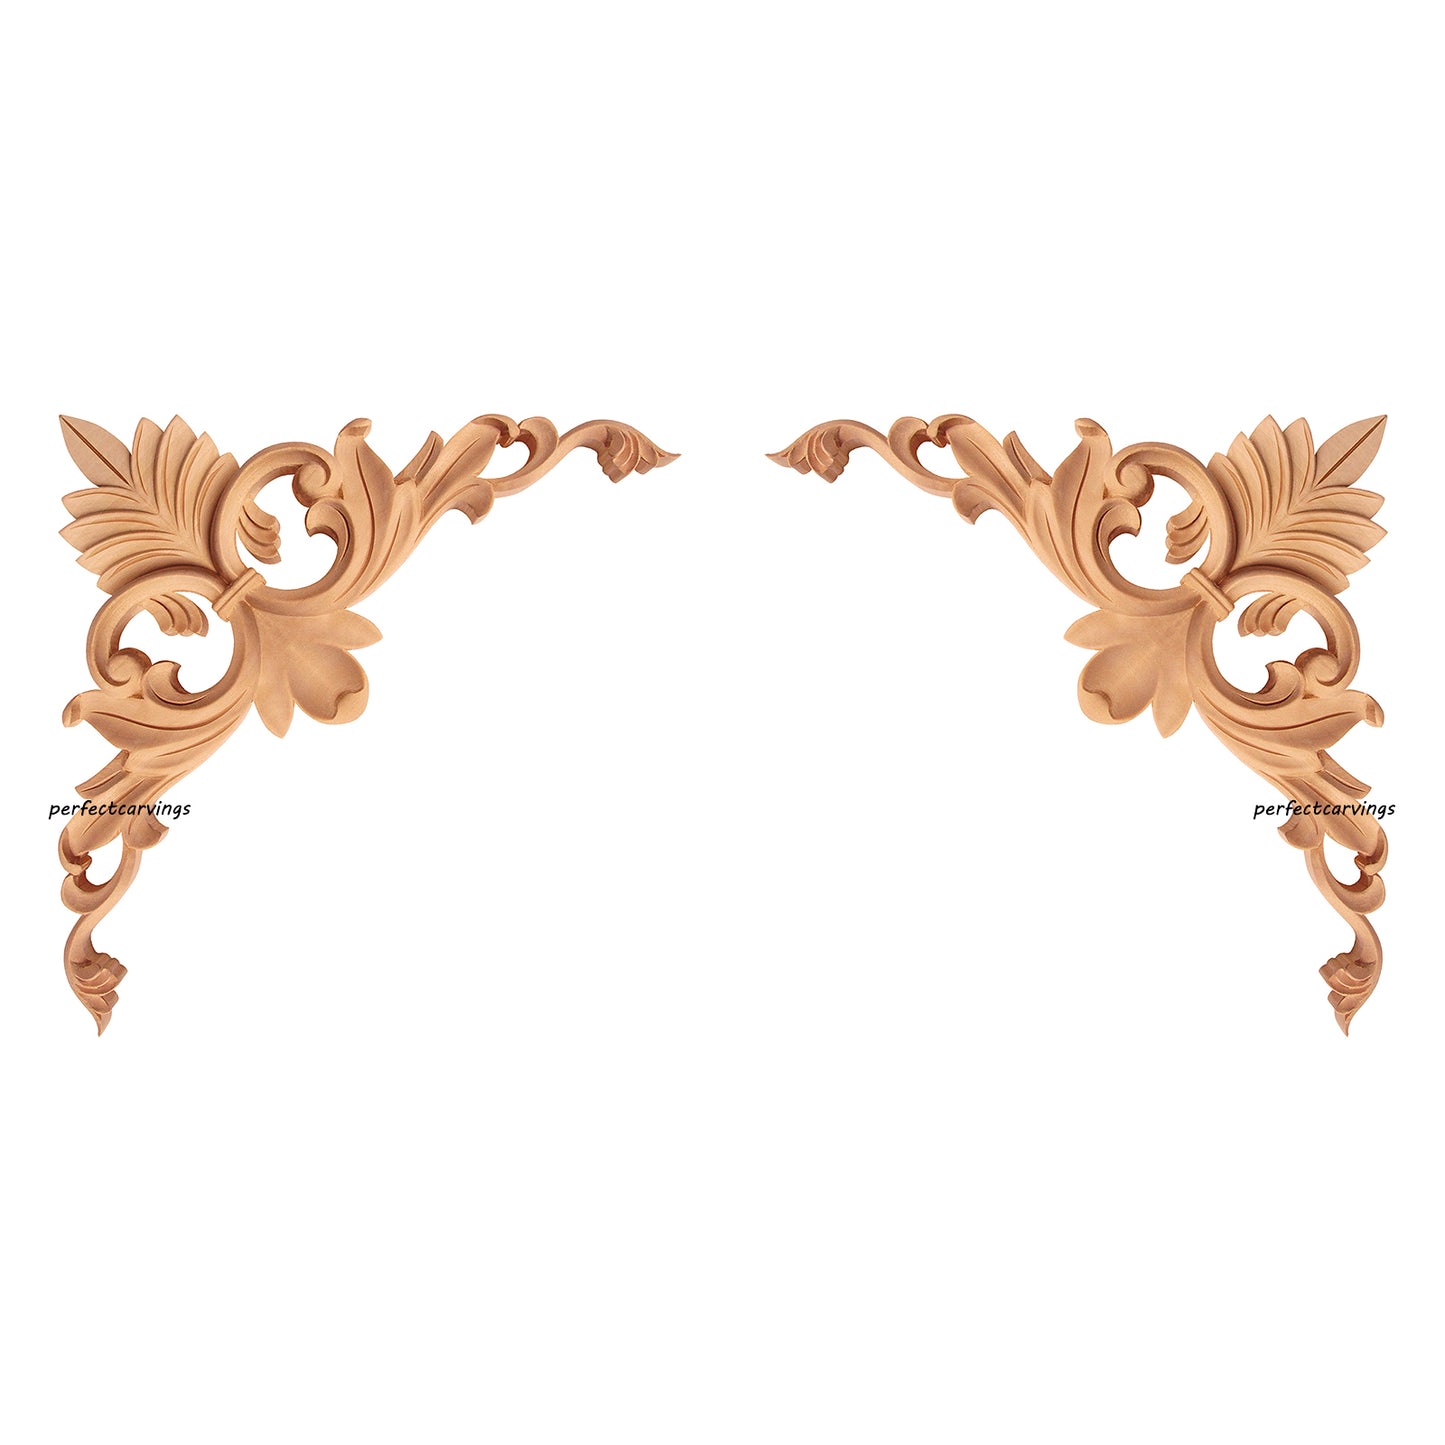 PAIR of Elegant Leaf Scroll Carved Wood Corner Appliques for Panels, Available in 3 Sizes